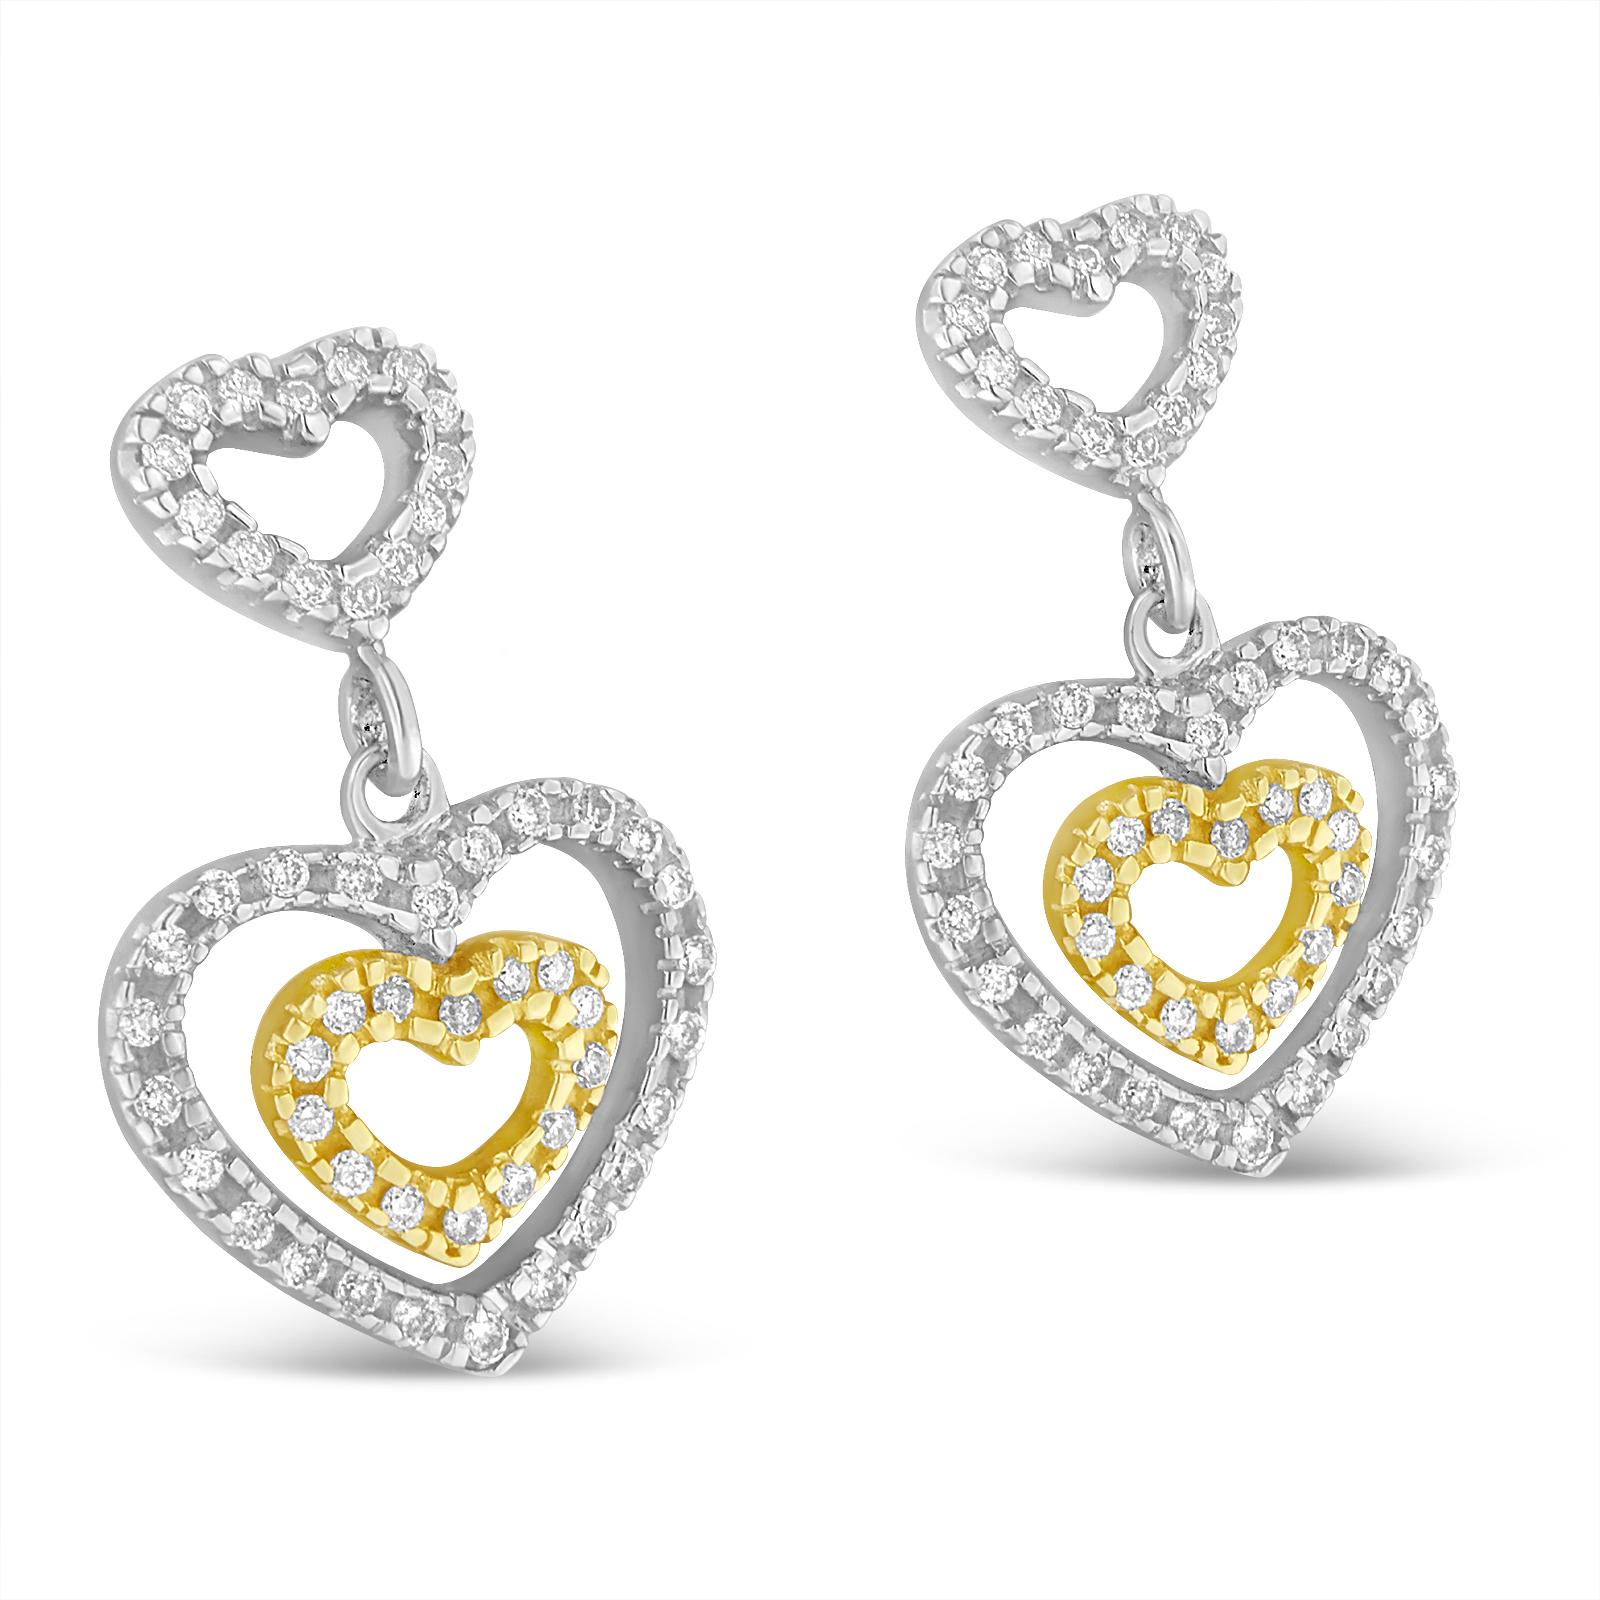 Celebrate your love by giving this alluring two-toned pair of dangle earrings to her. It features three hearts in each of the earrings, which is embellished with shimmering round-cut diamonds. Construction of this elegant pair of earrings with